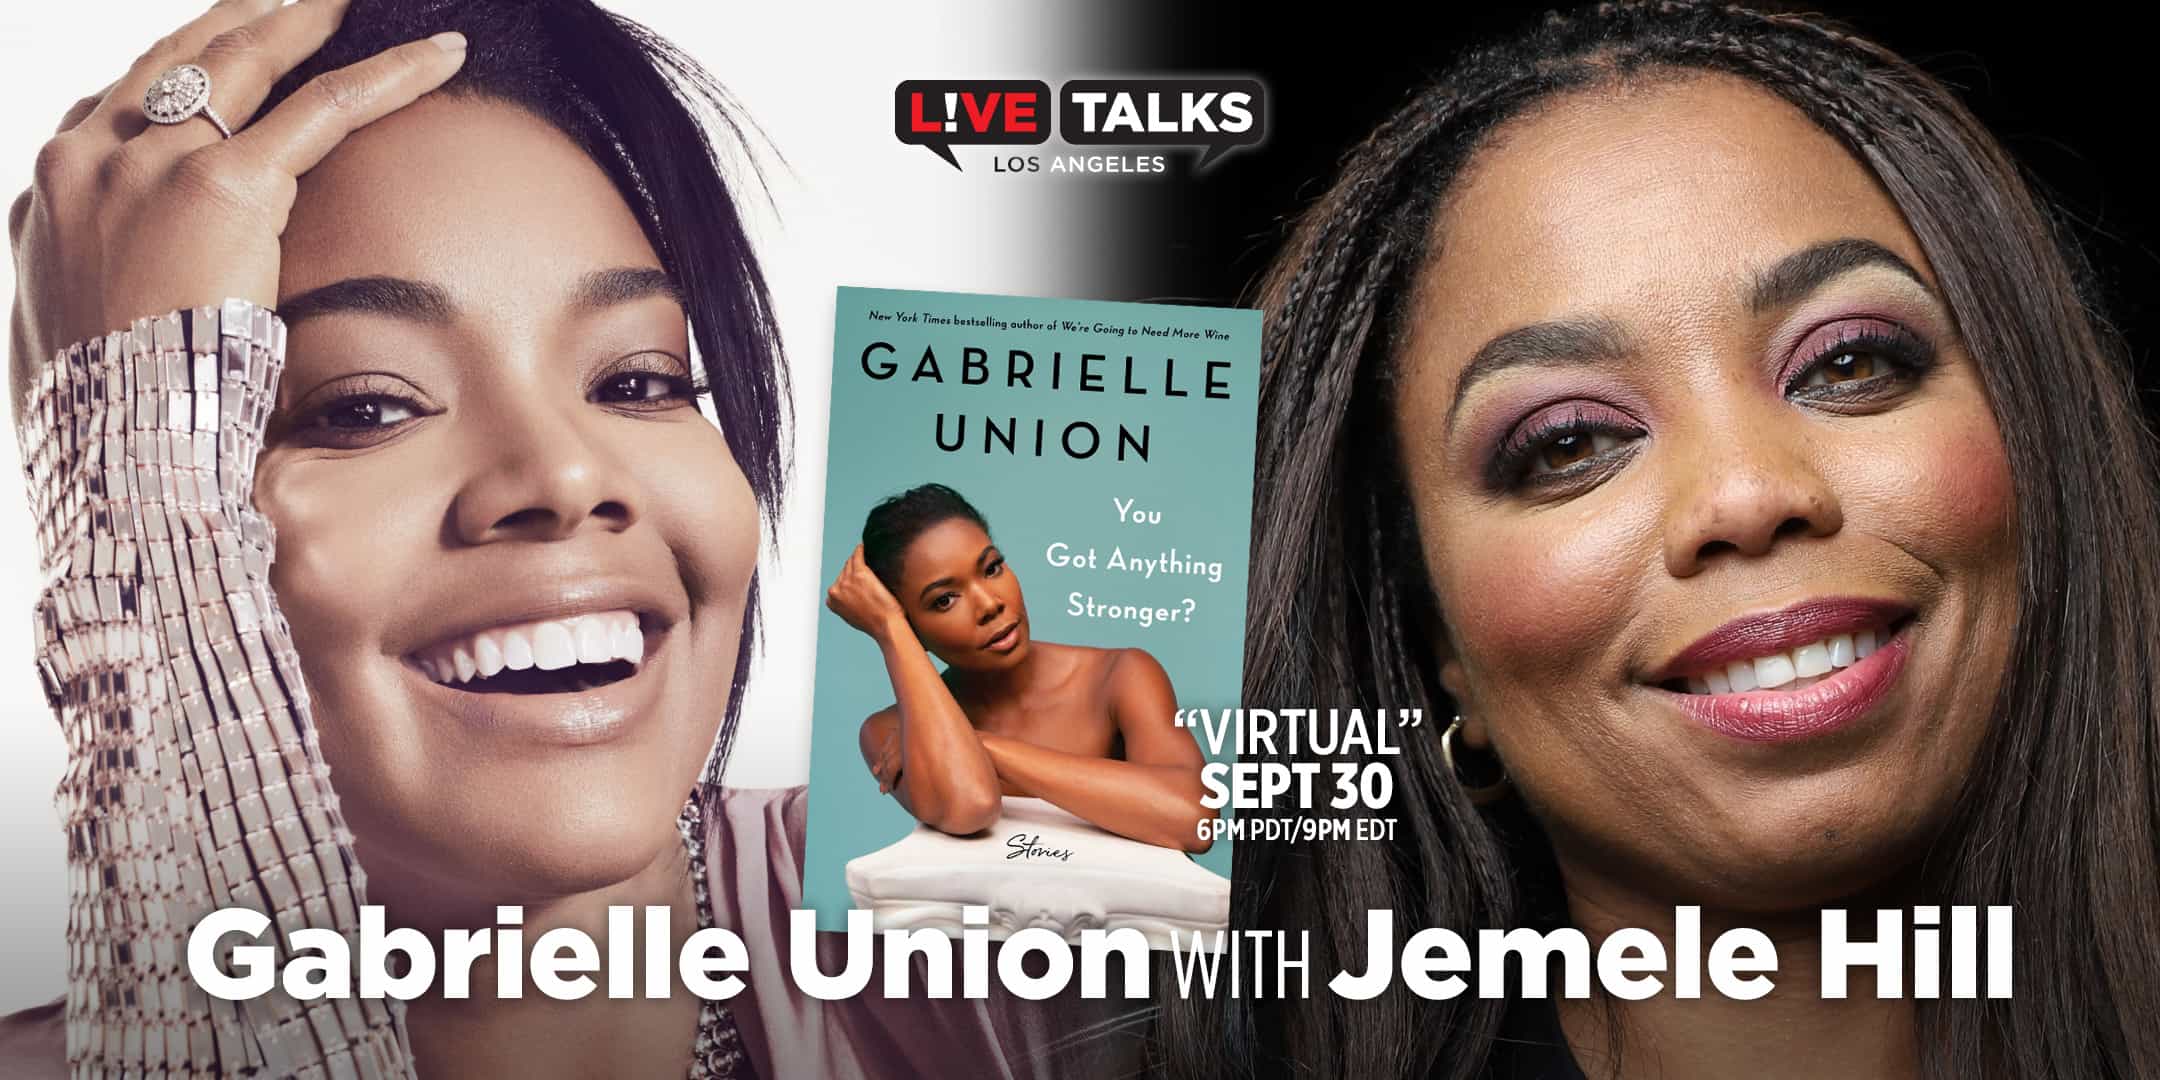 Book Review: We're Going To Need More Wine, by Gabrielle Union